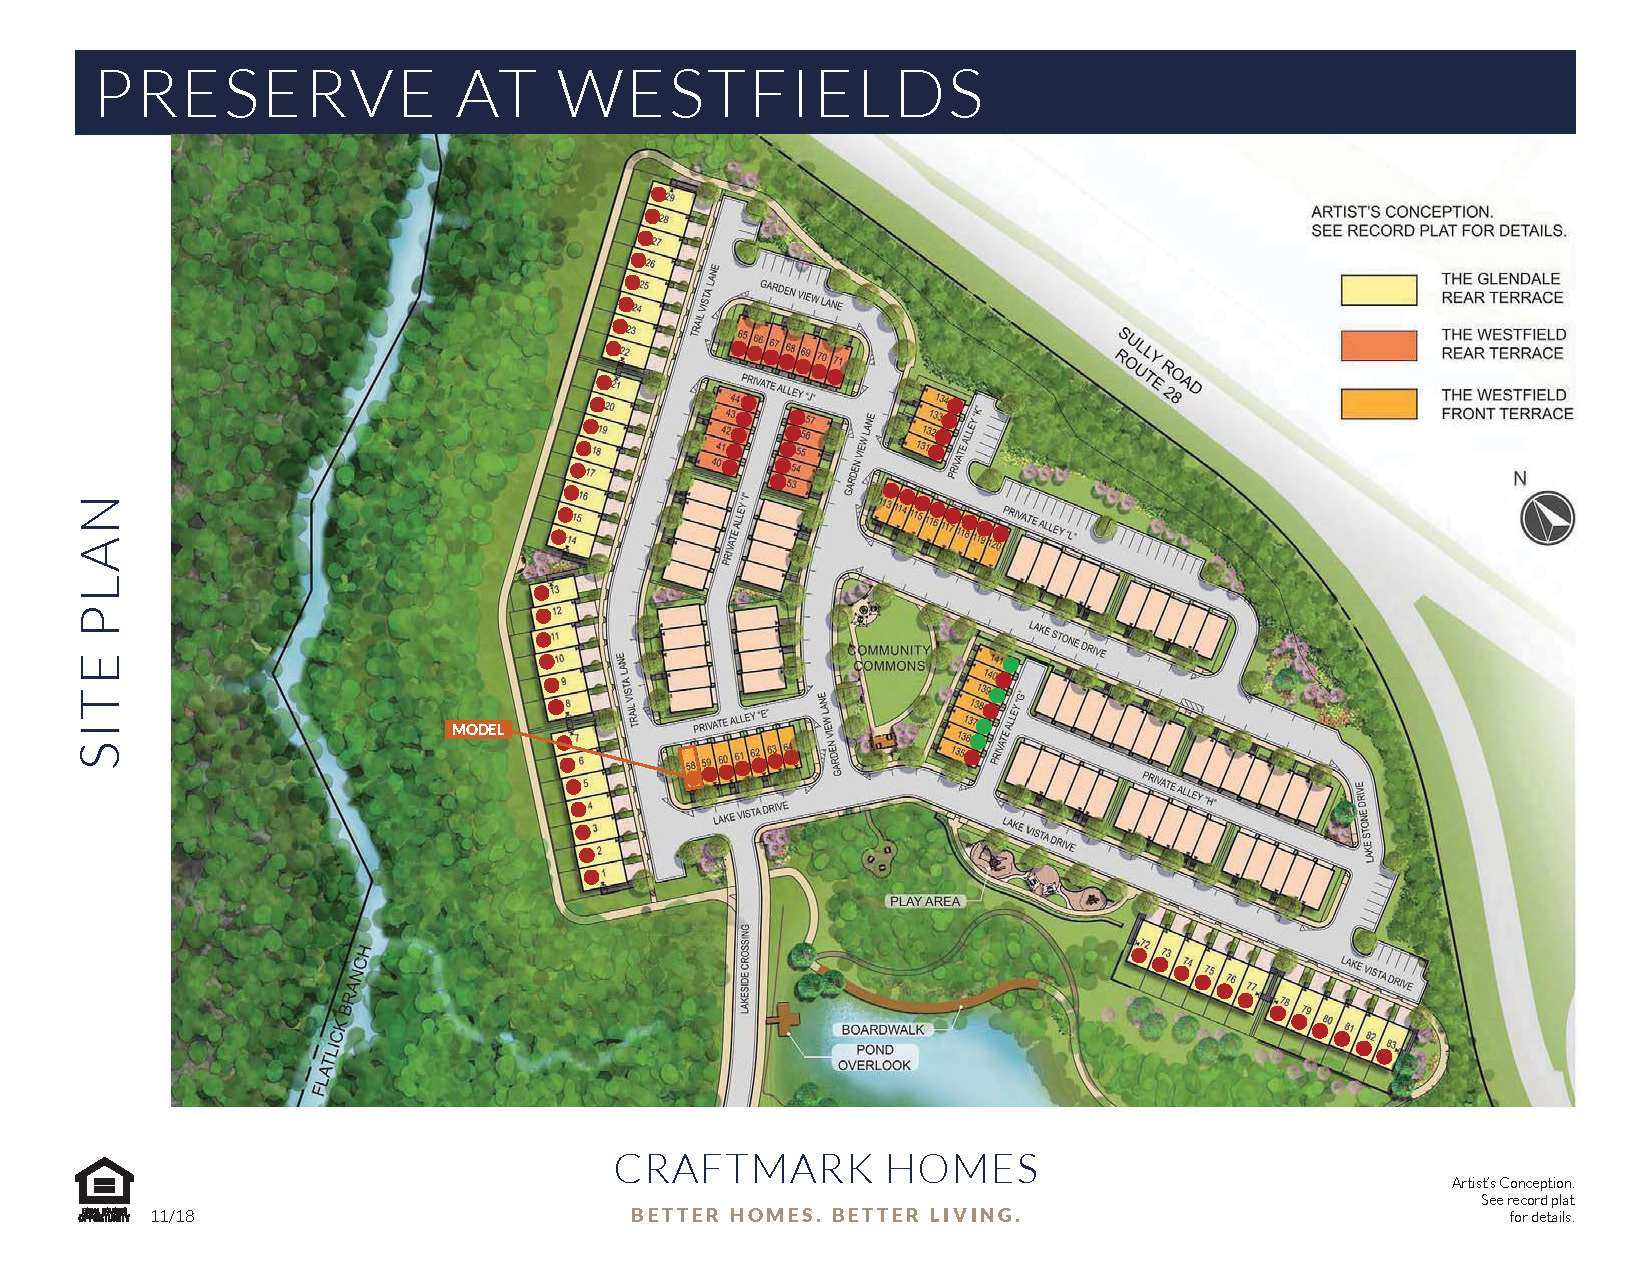 Preserve at Westfields Site Plan, Townhomes in Chantilly VA, Craftmark Homes